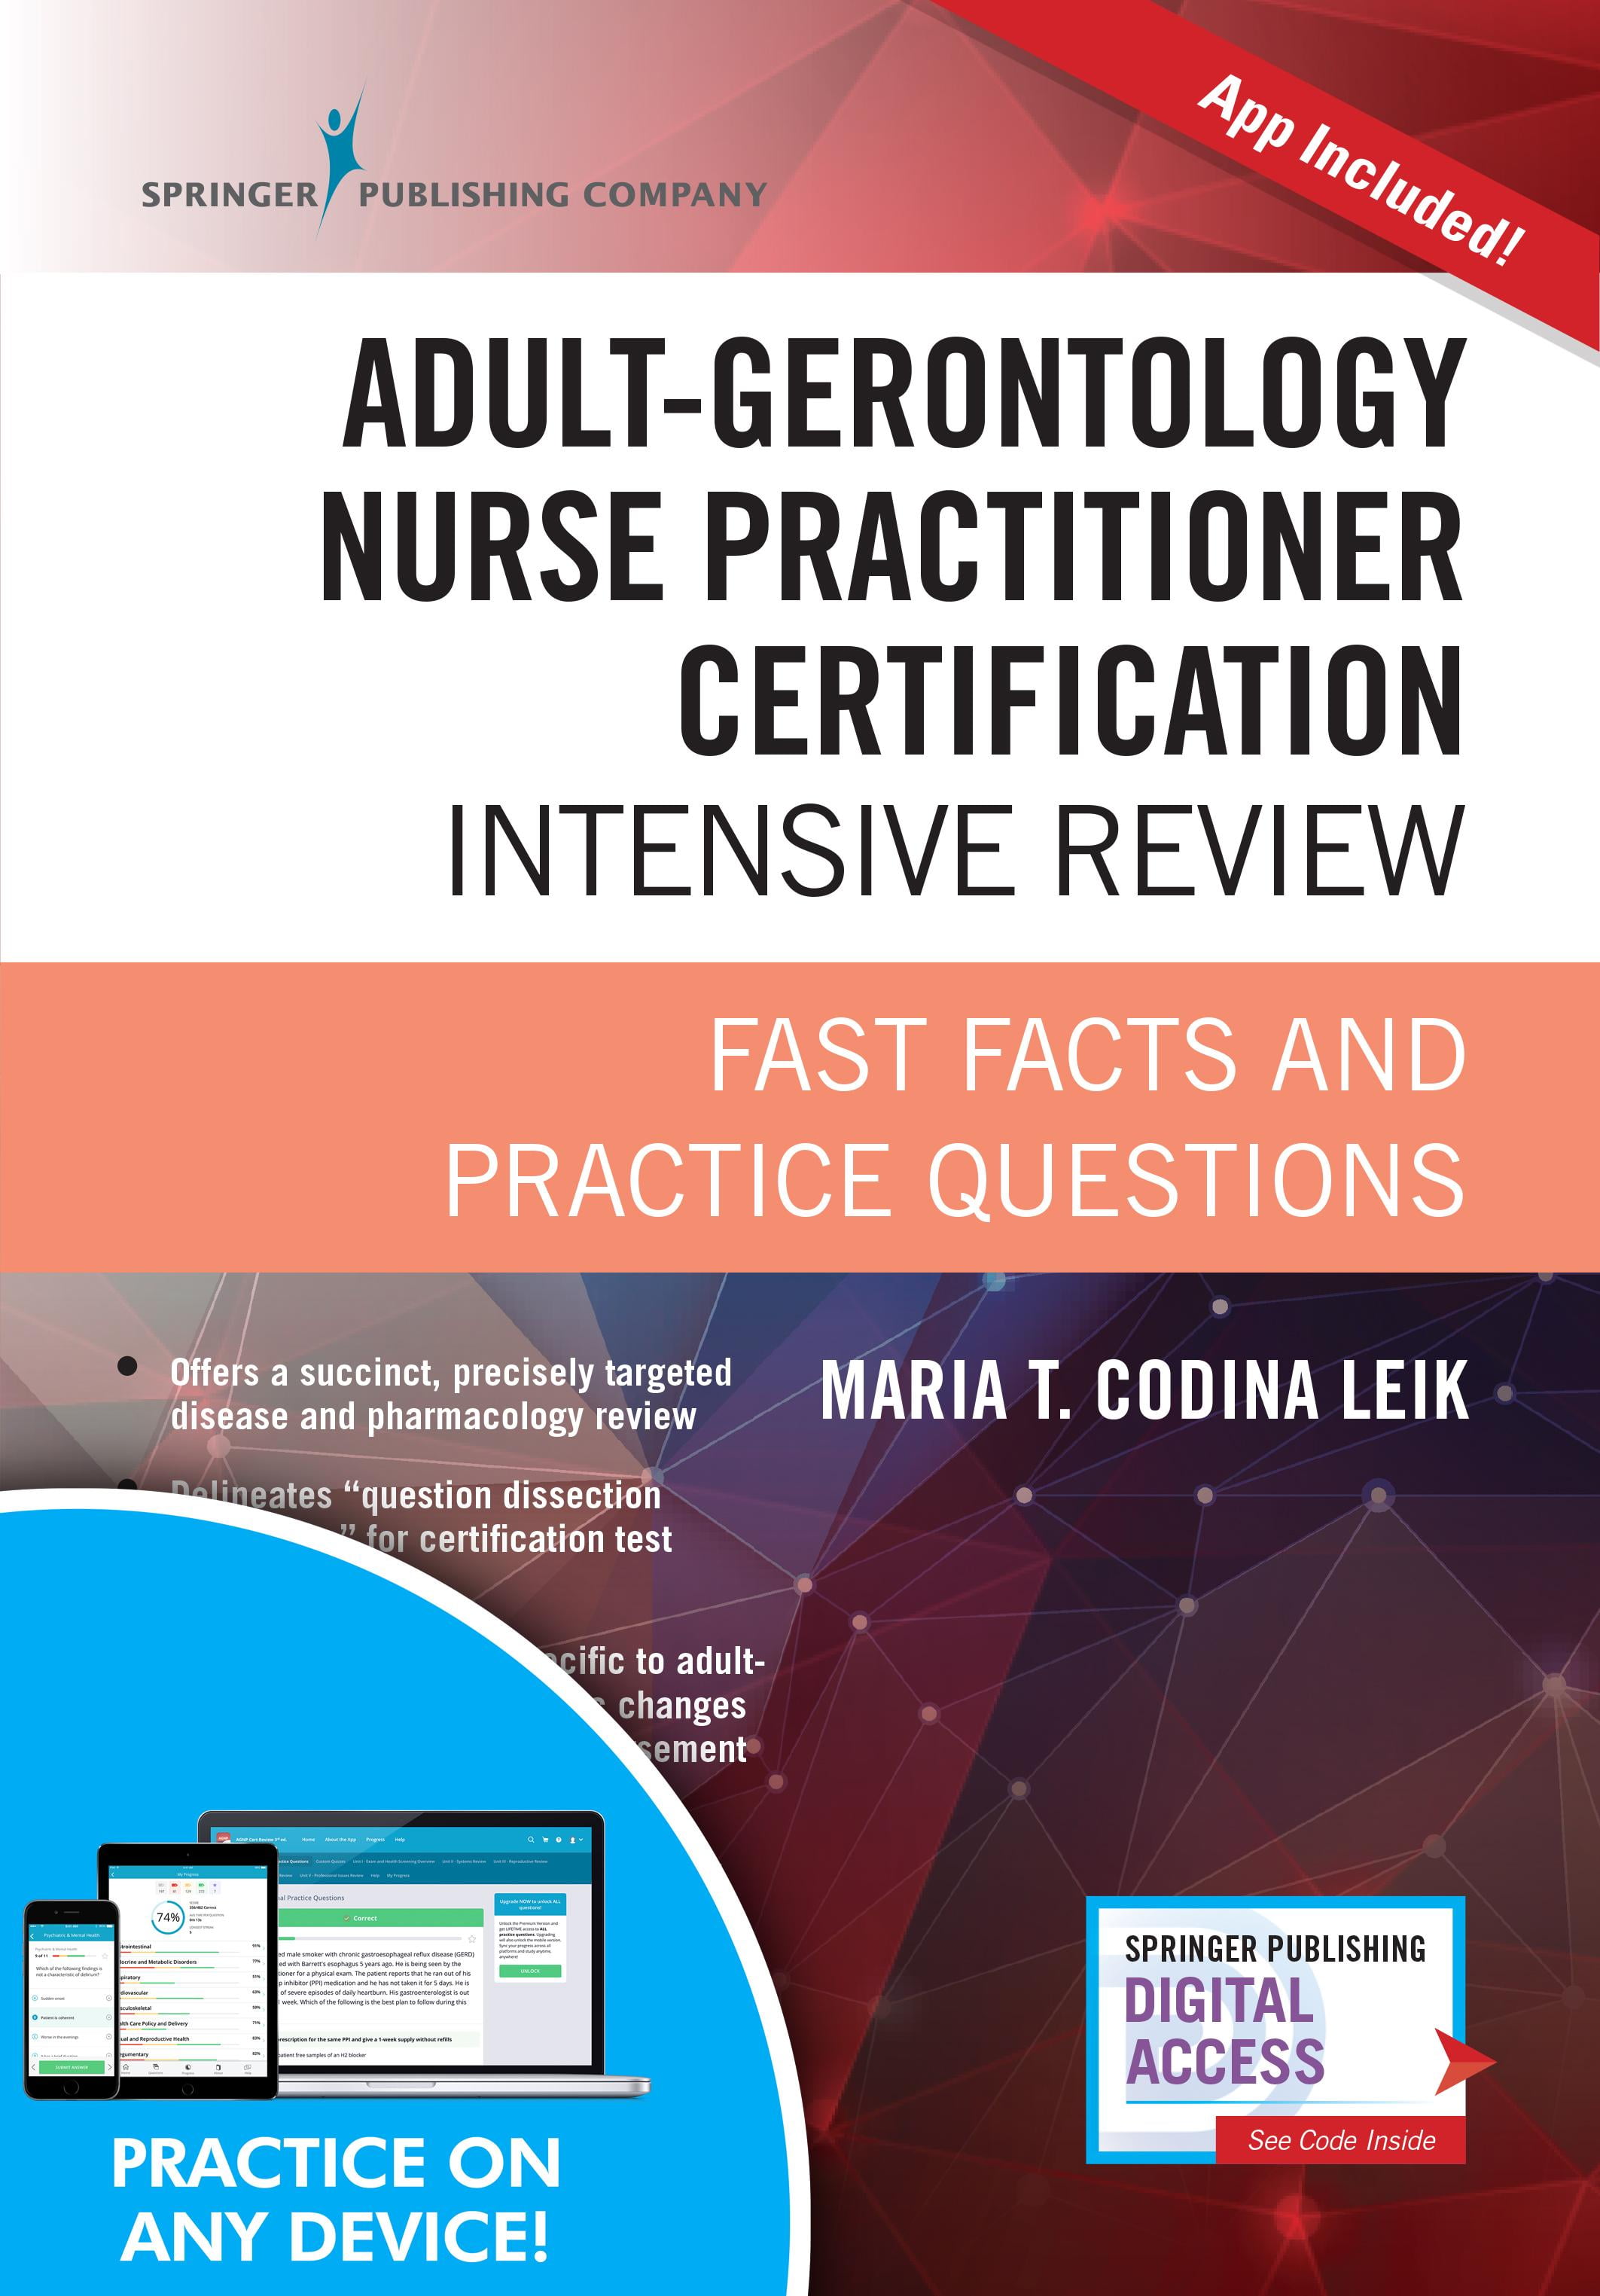 AdultGerontology Nurse Practitioner Certification Intensive Review, Third Edition Fast Facts